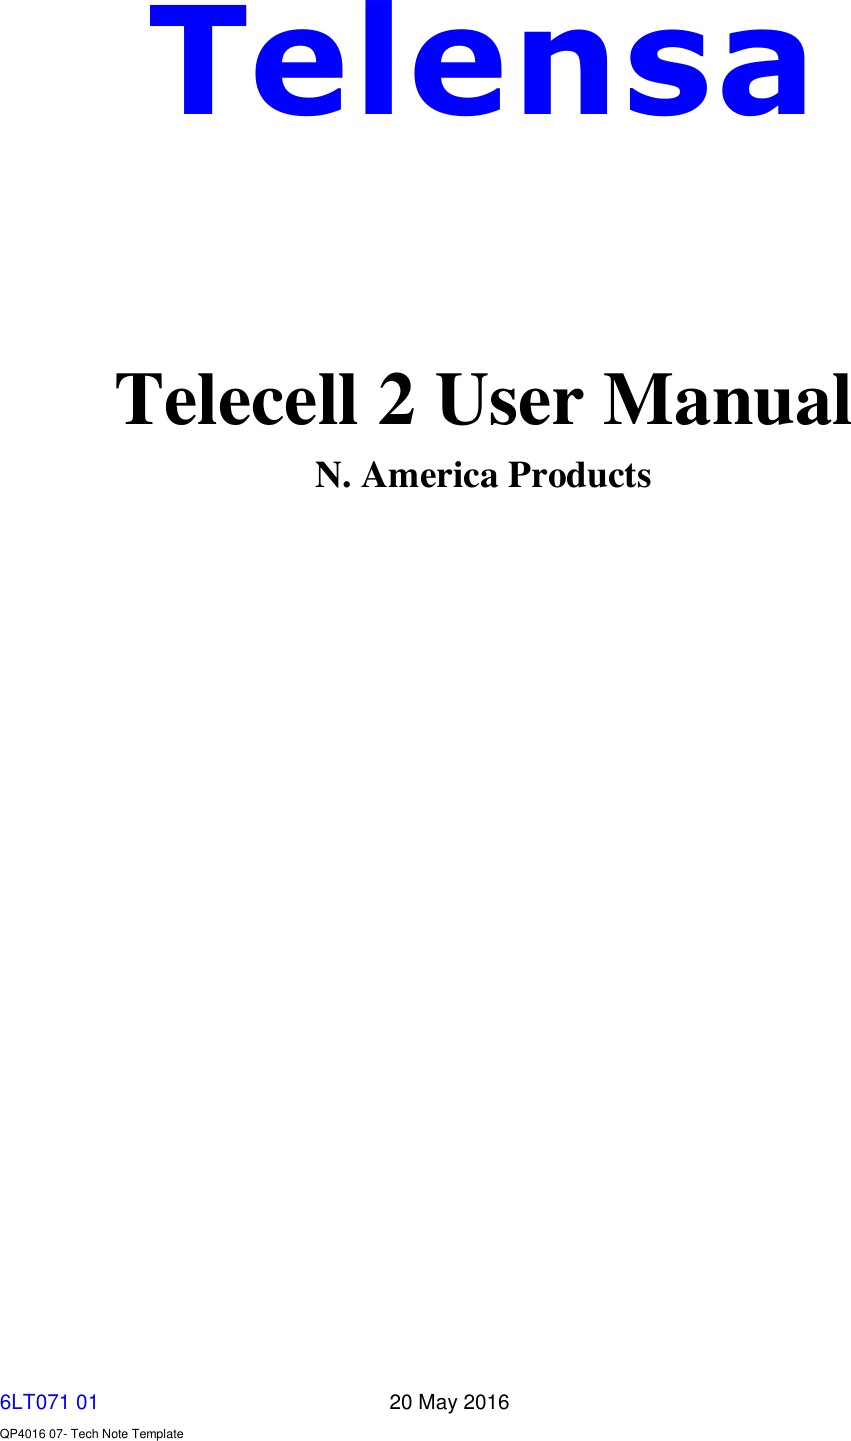   6LT071 01       20 May 2016    QP4016 07- Tech Note Template Telensa    Telecell 2 User Manual N. America Products                 